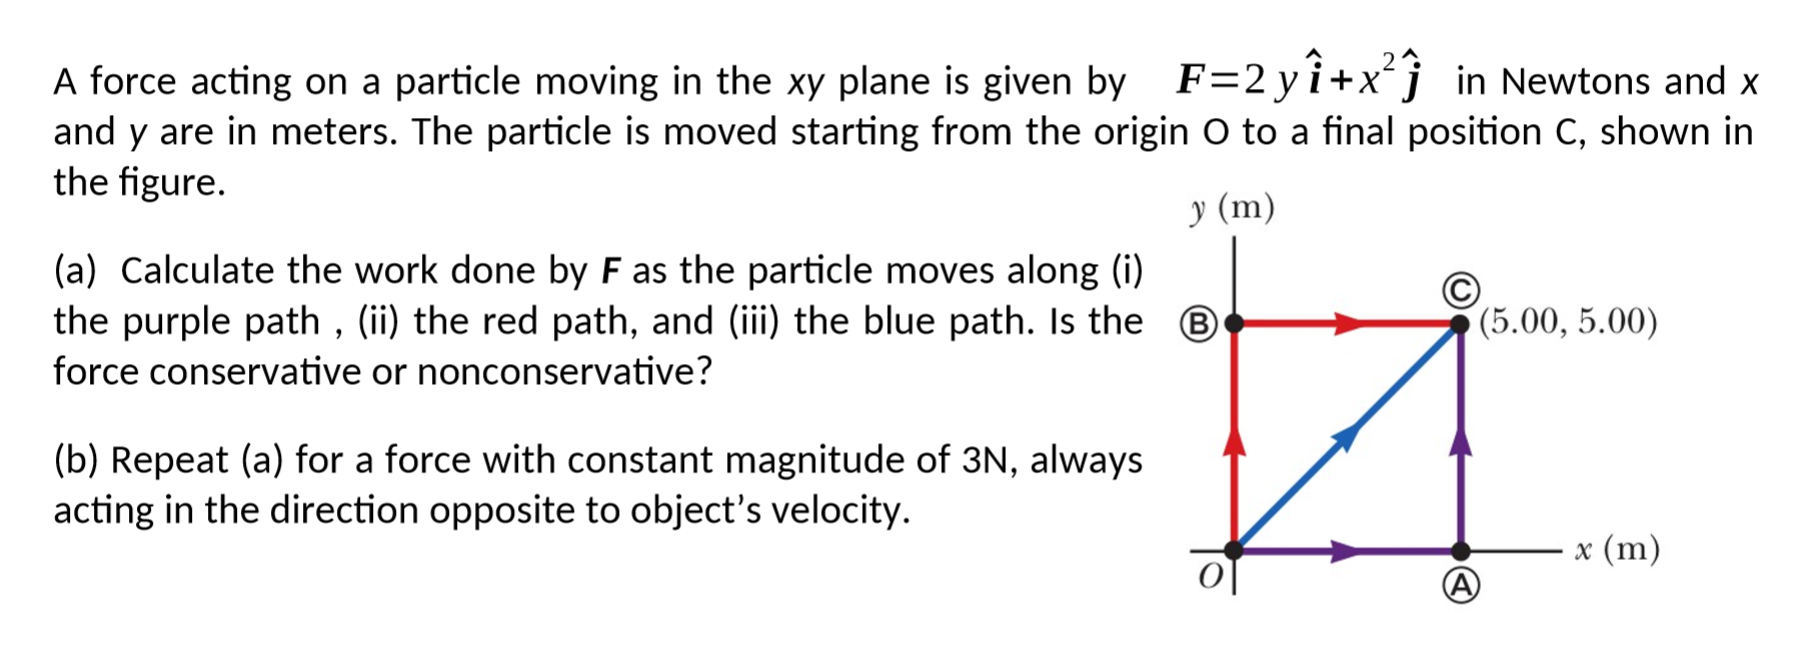 A force acting on a particle moving in the xy plane is given by F=2 yî+x°j_in Newtons and x
and y are in meters. The particle is moved starting from the origin O to a final position C, shown in
the figure.
y (m)
(a) Calculate the work done by F as the particle moves along (i)
the purple path , (ii) the red path, and (ii) the blue path. Is the B
(5.00, 5.00)
force conservative or nonconservative?
(b) Repeat (a) for a force with constant magnitude of 3N, always
acting in the direction opposite to object's velocity.
x (m)
